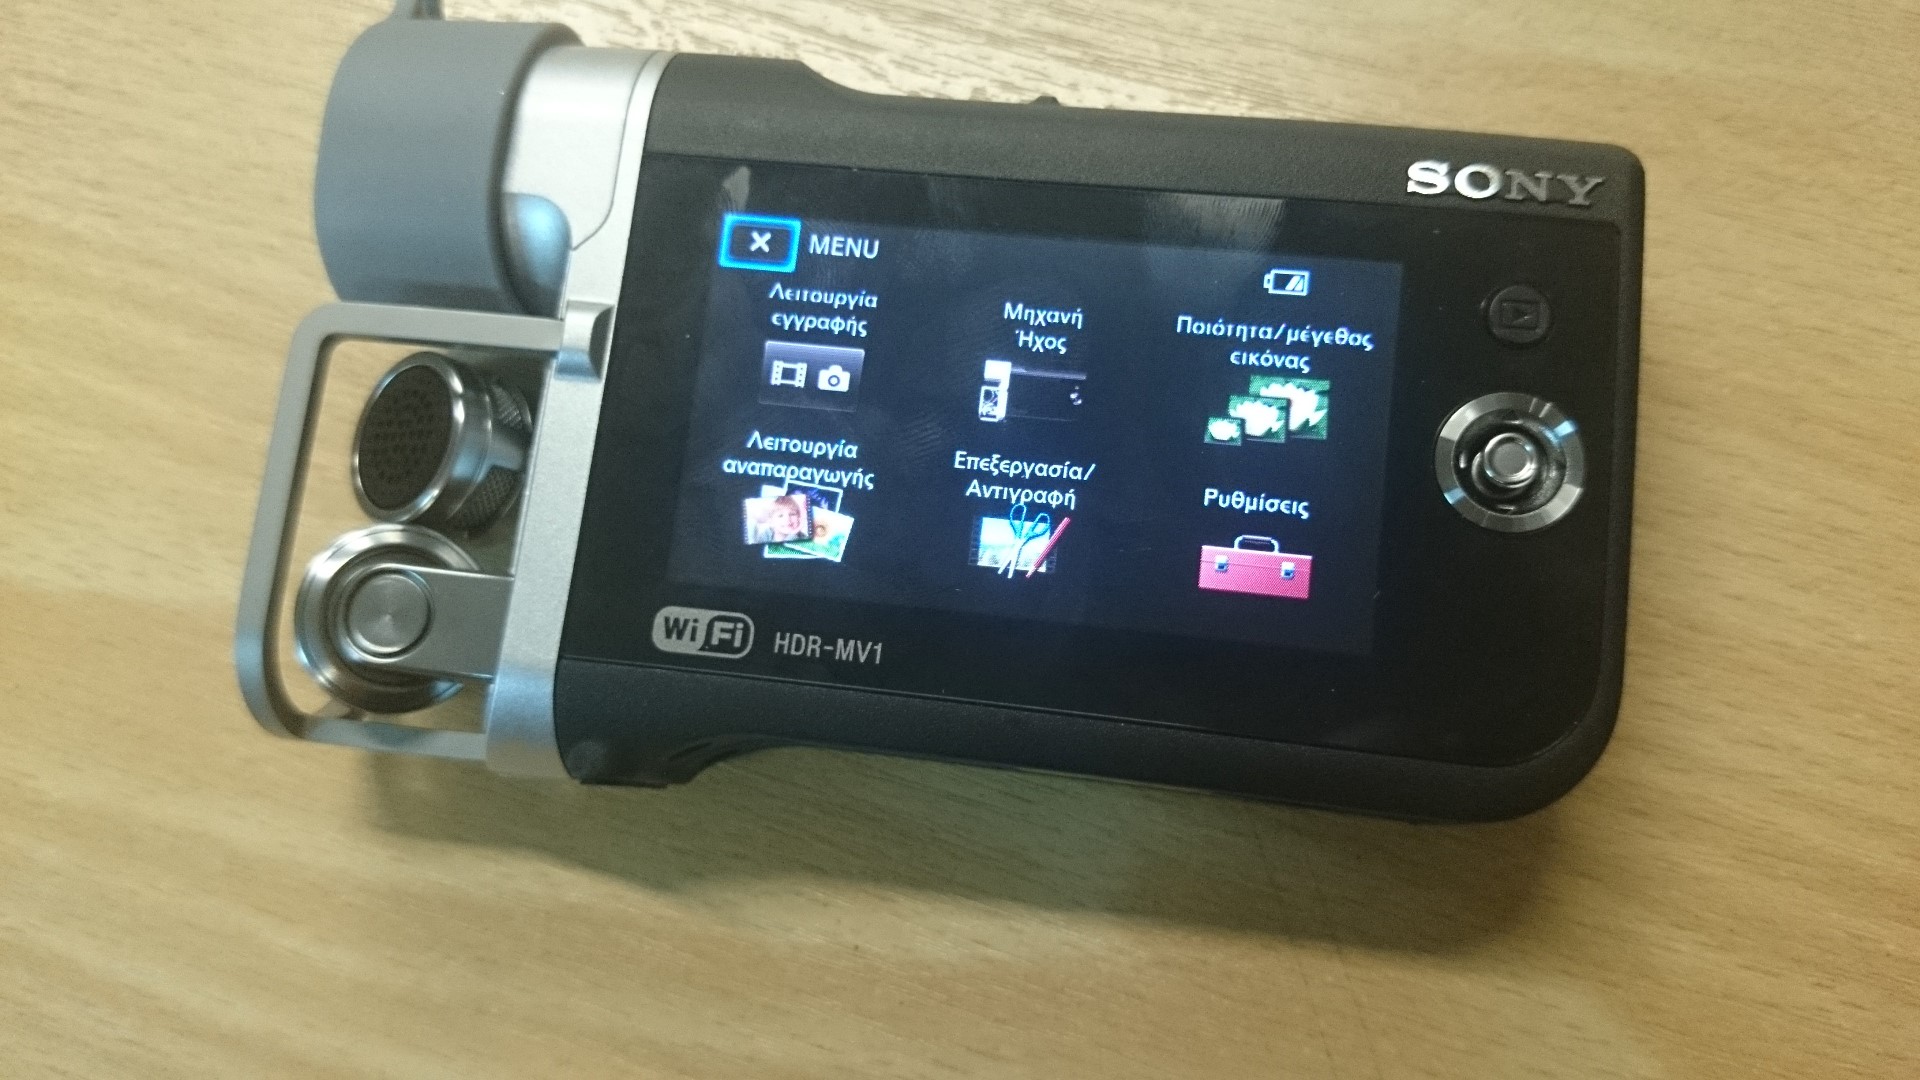 Sony HDR-MV1 hands-on preview: HD video και 3D ήχος σε compact διαστάσεις